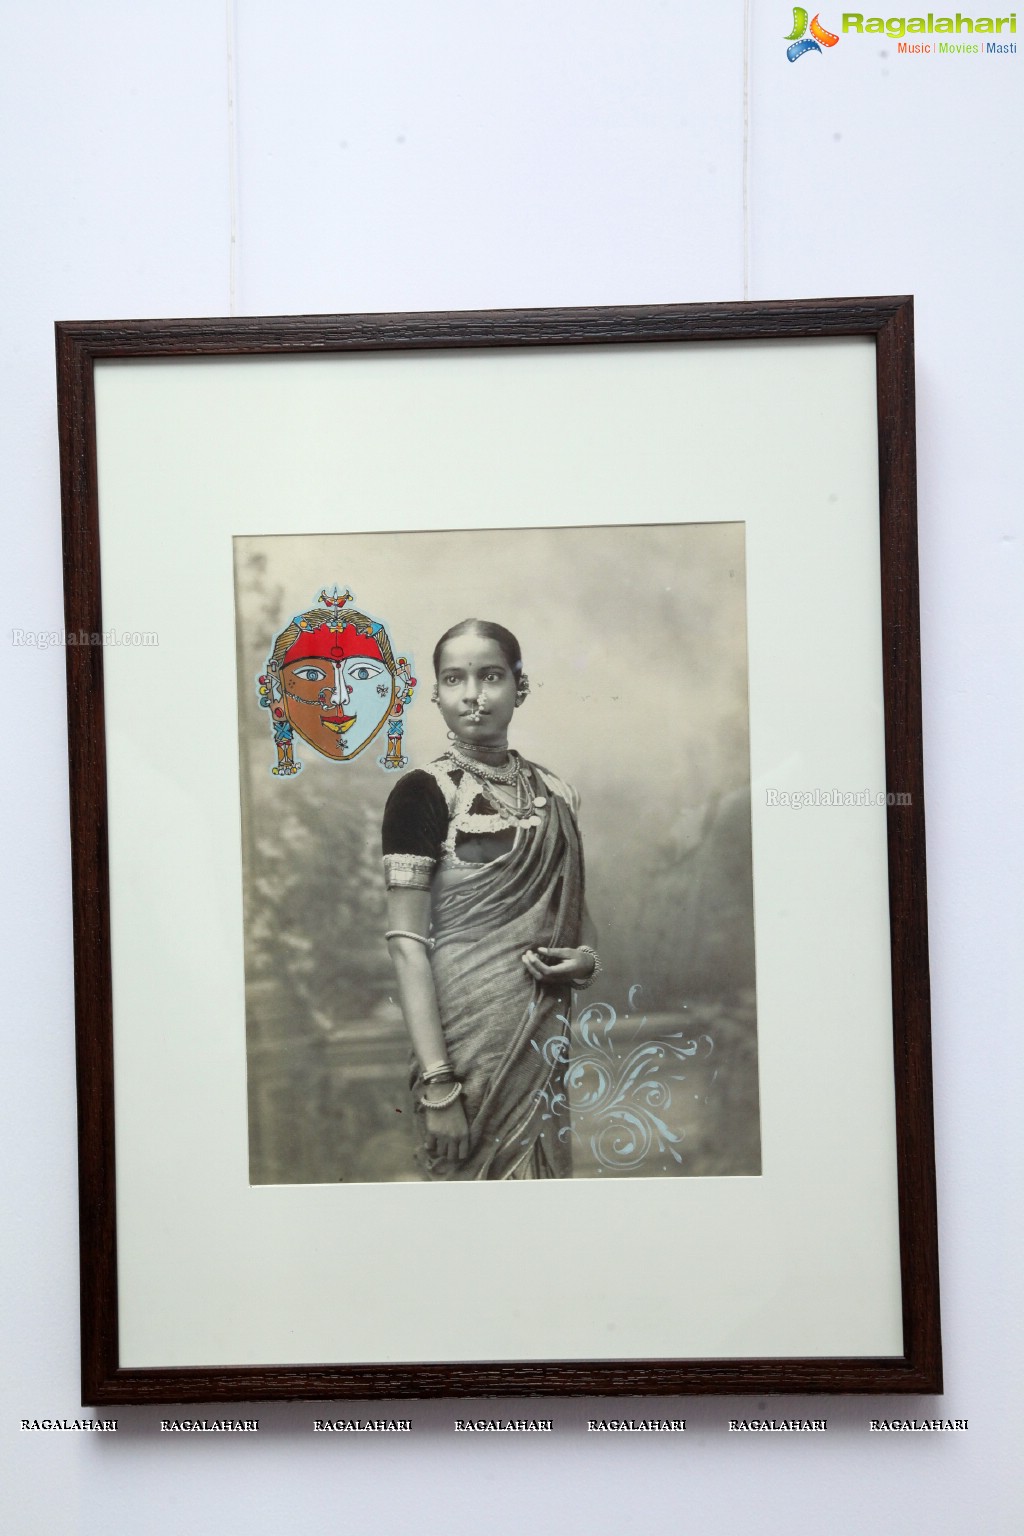 A Reflection of Yesterday's Truth Today's Imagination - Art Exhibition by Masuram Ravi Kanth at Kalakriti Art Gallery